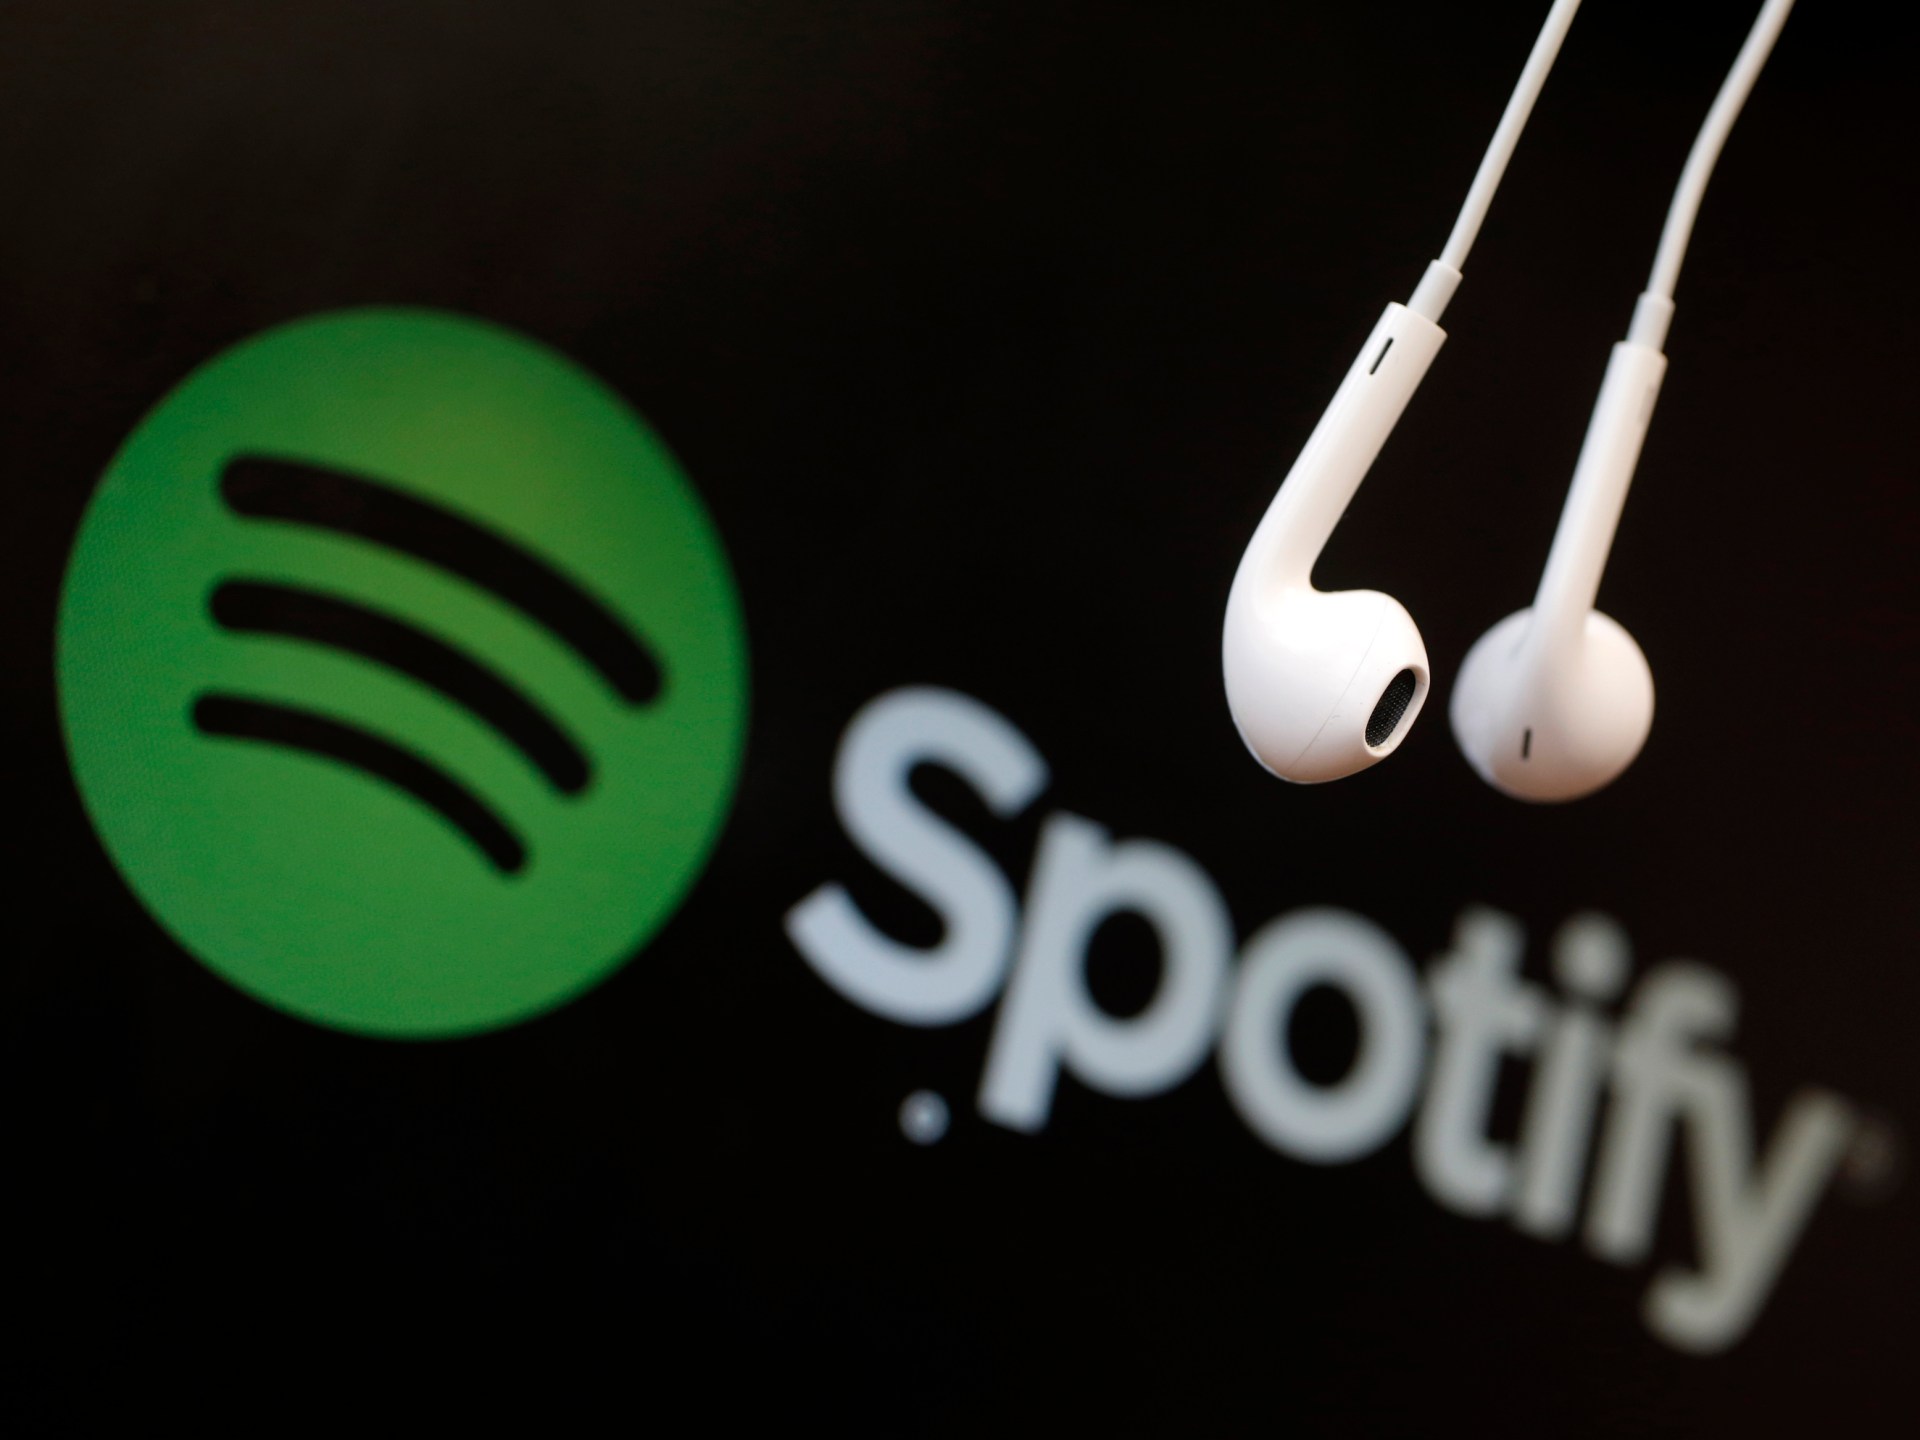 Spotify to announce layoffs as soon as this week: Bloomberg